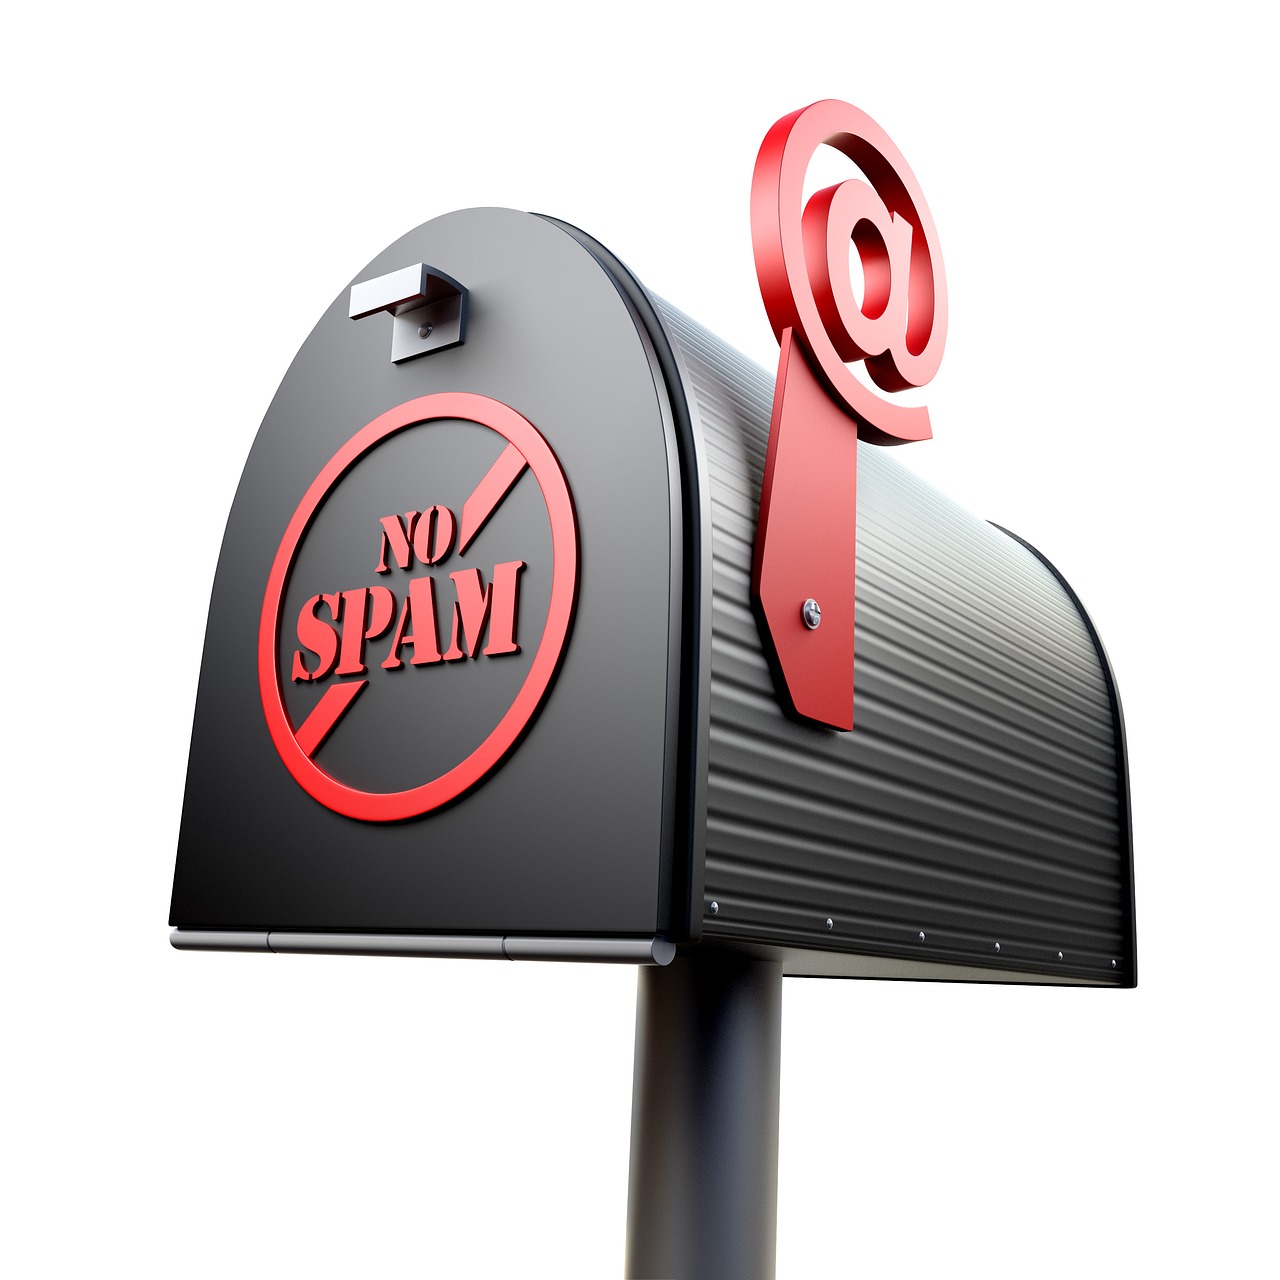 spam mail box email 3d render free photo